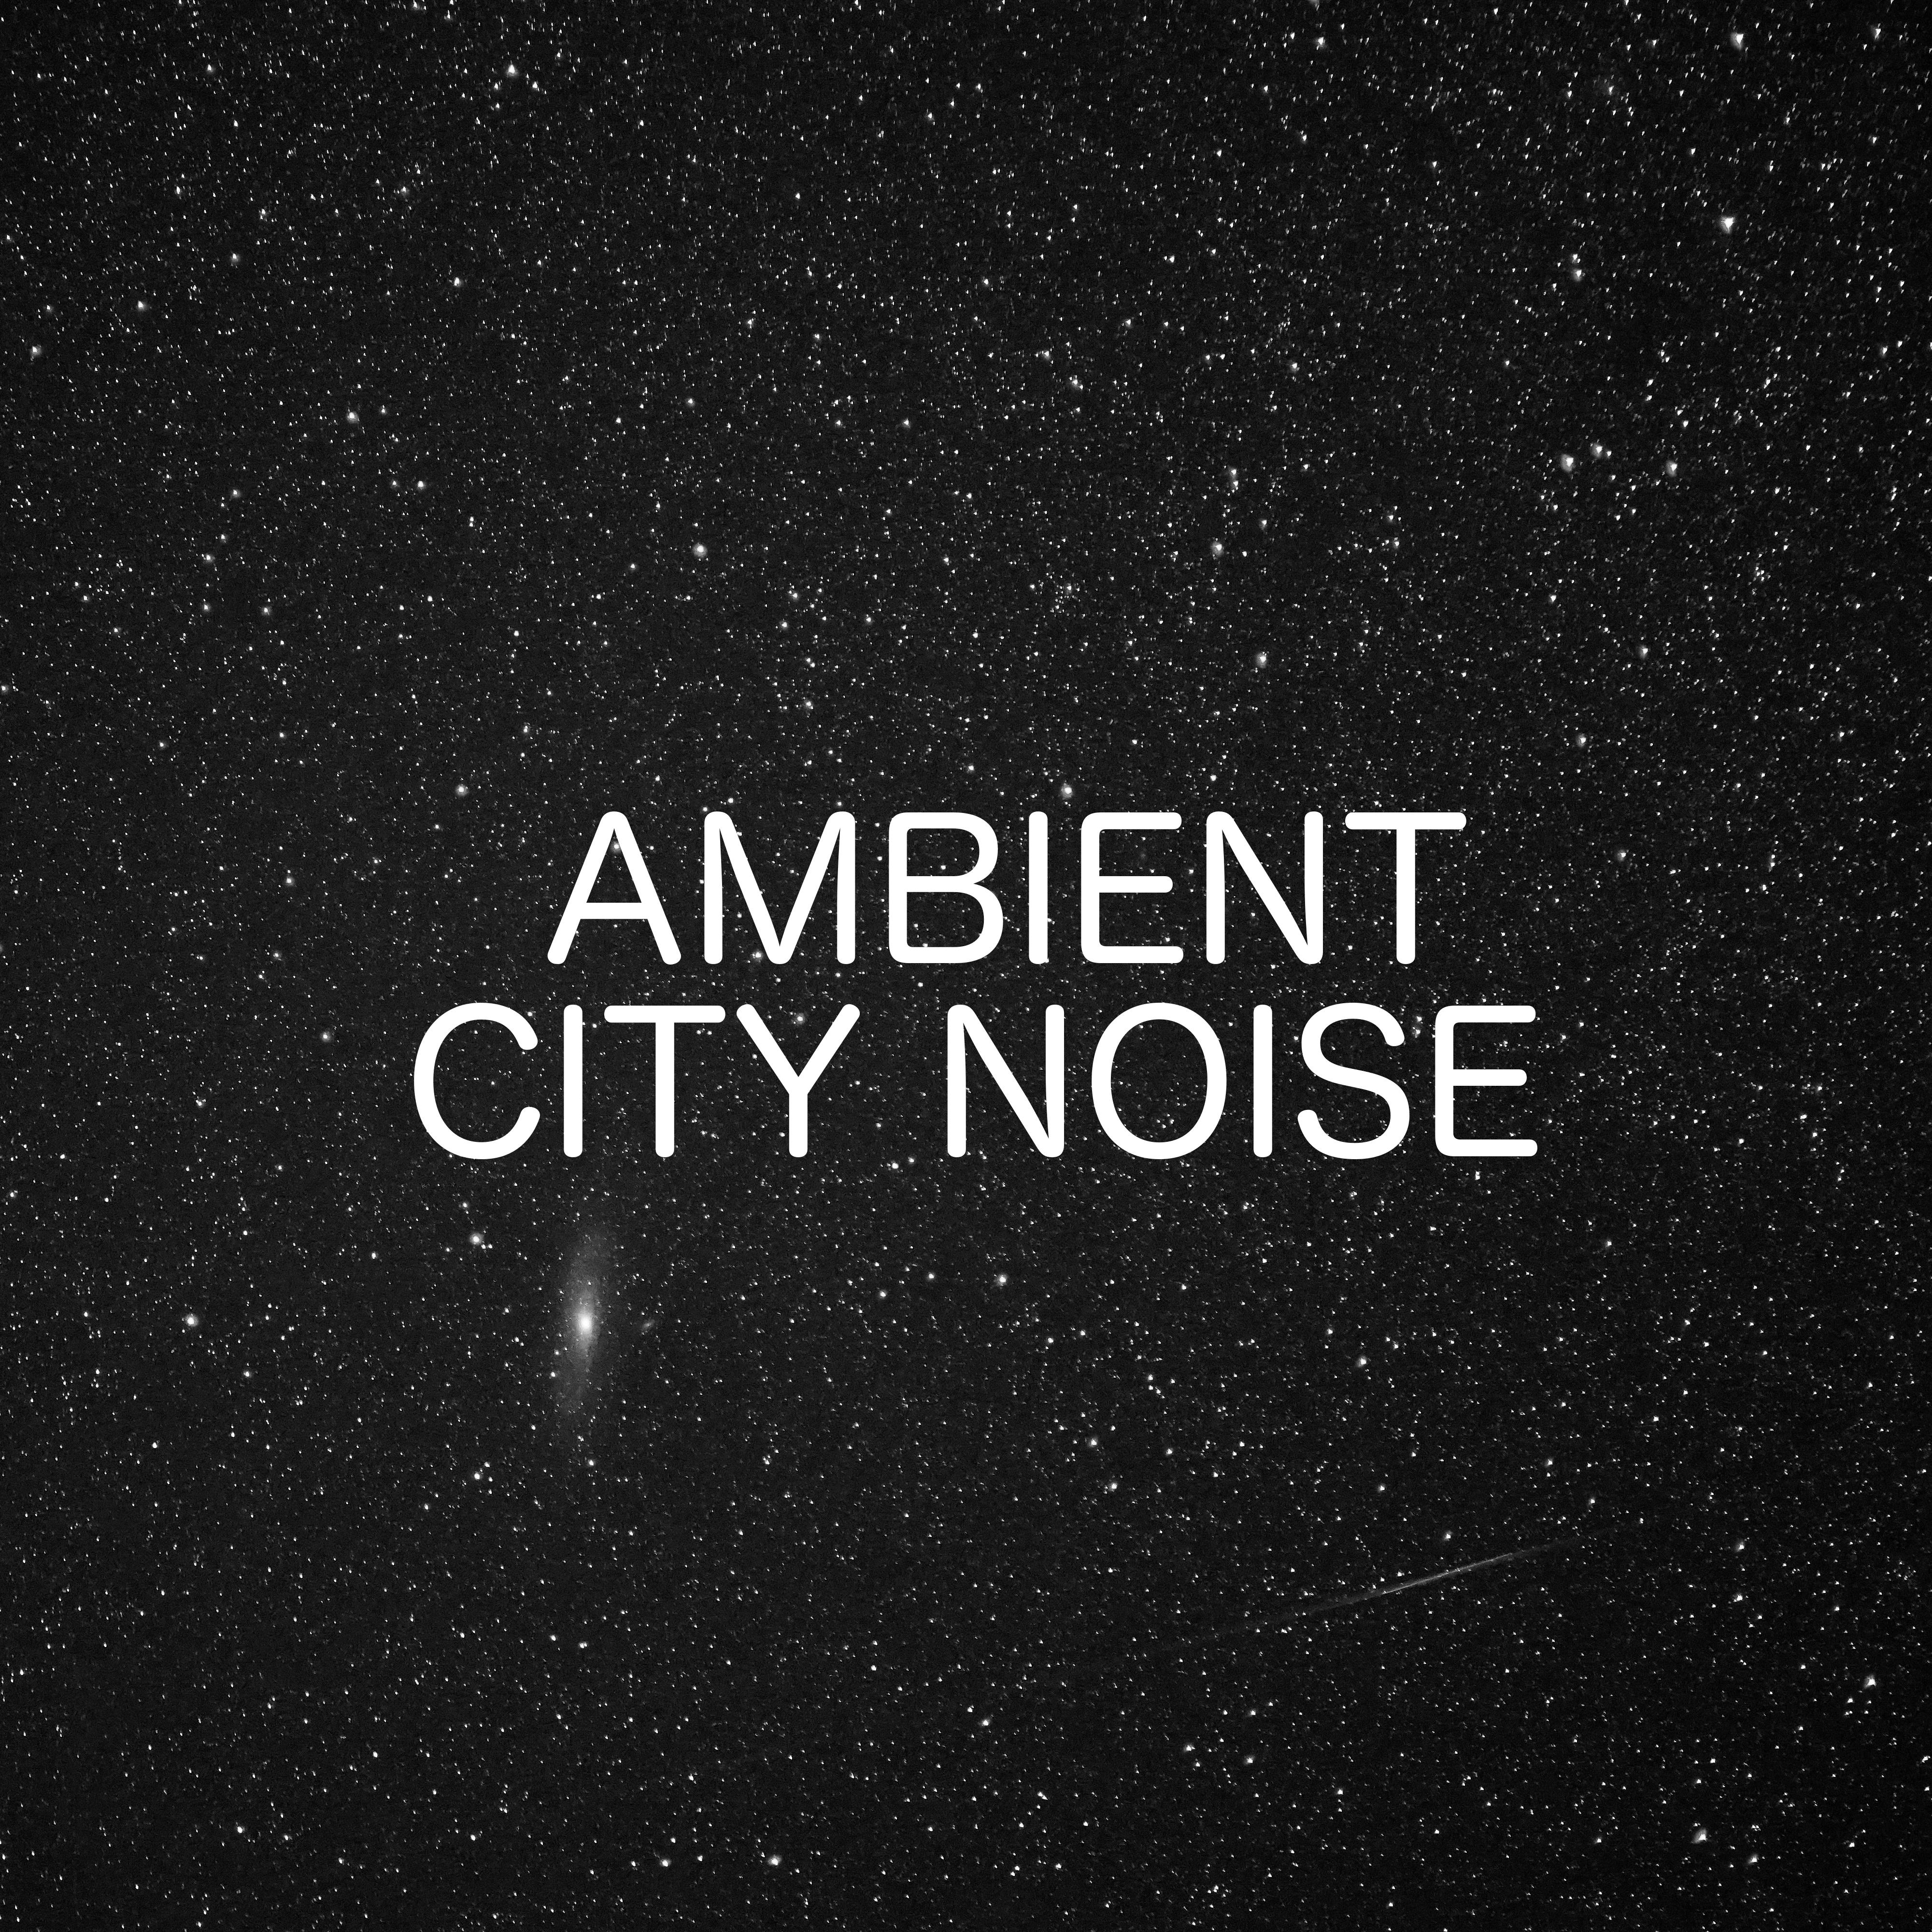 Ambient City Noise For Relaxation, Sleep And Calm